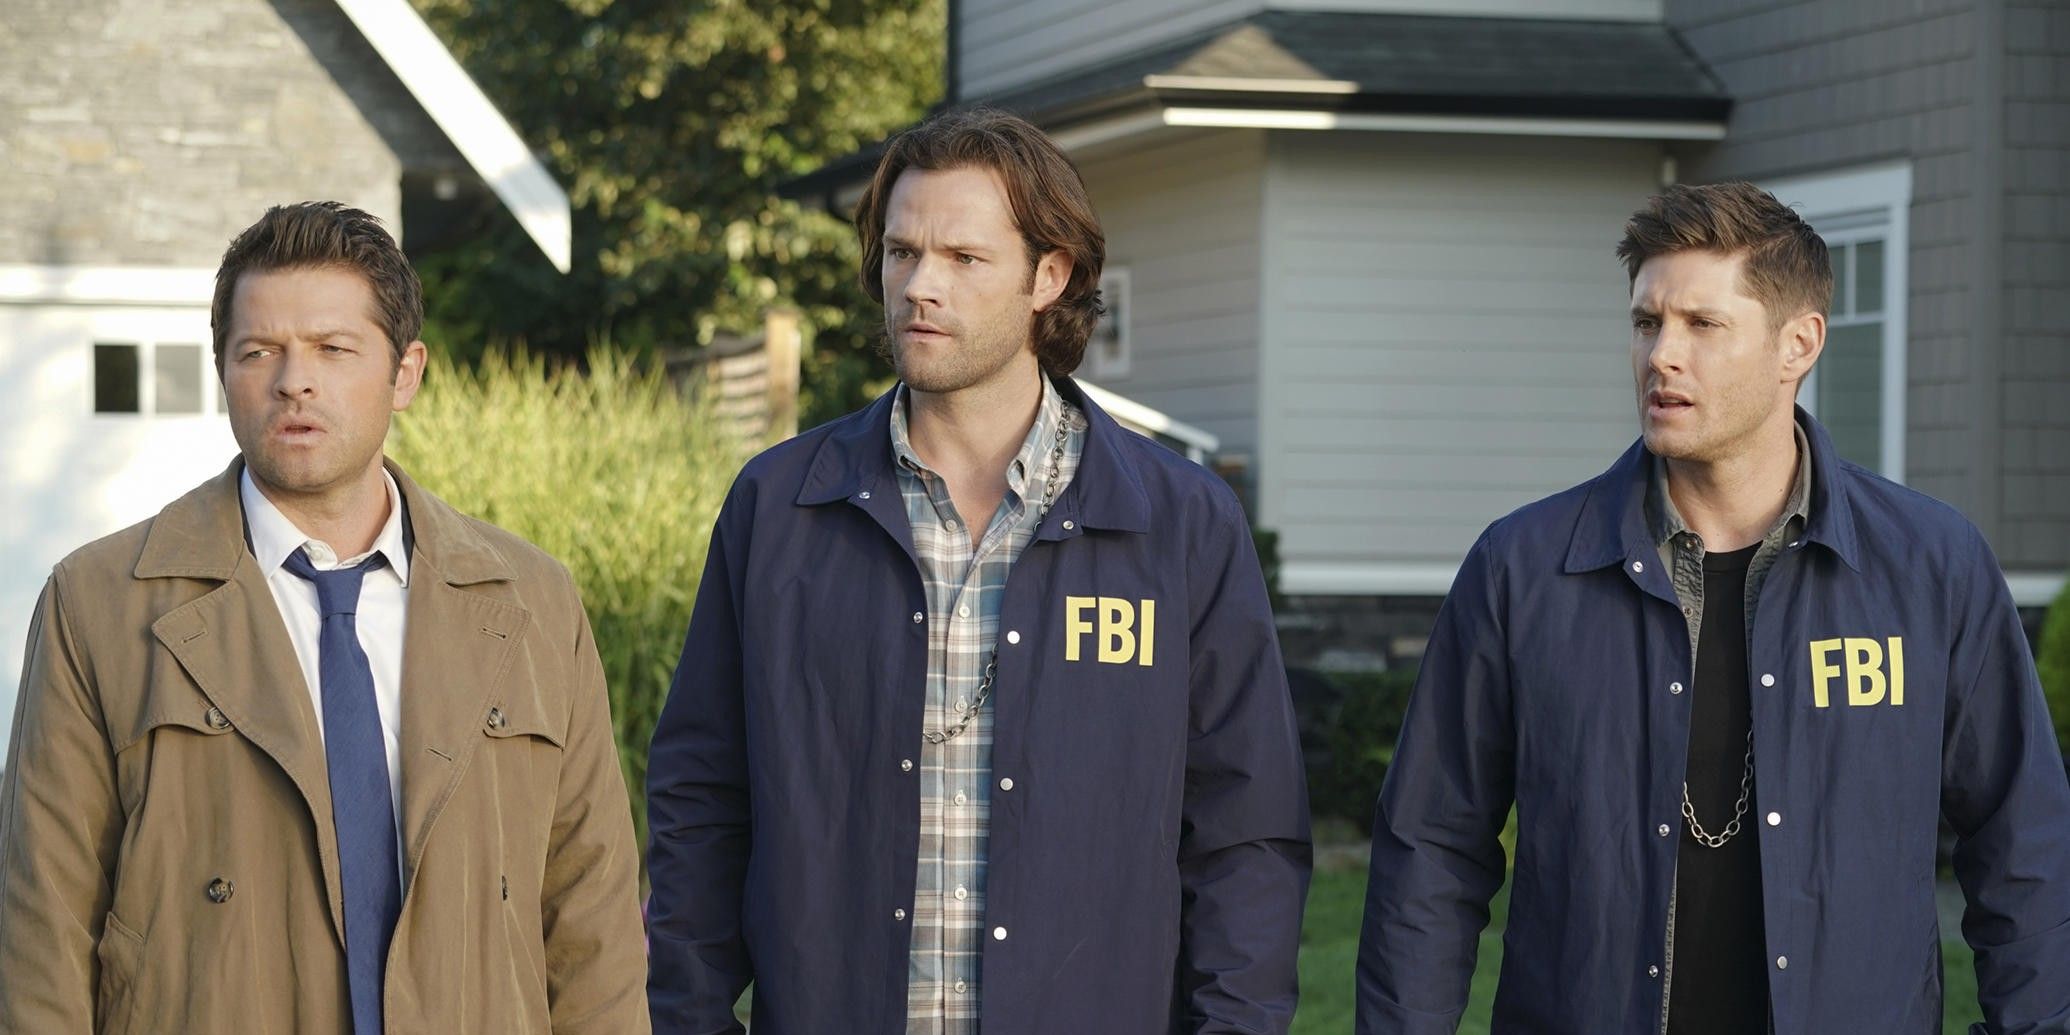 Misha Collins as Castiel, Jared Padakecki as Sam Winchester and Jensen Ackles as Dean in Supernatural